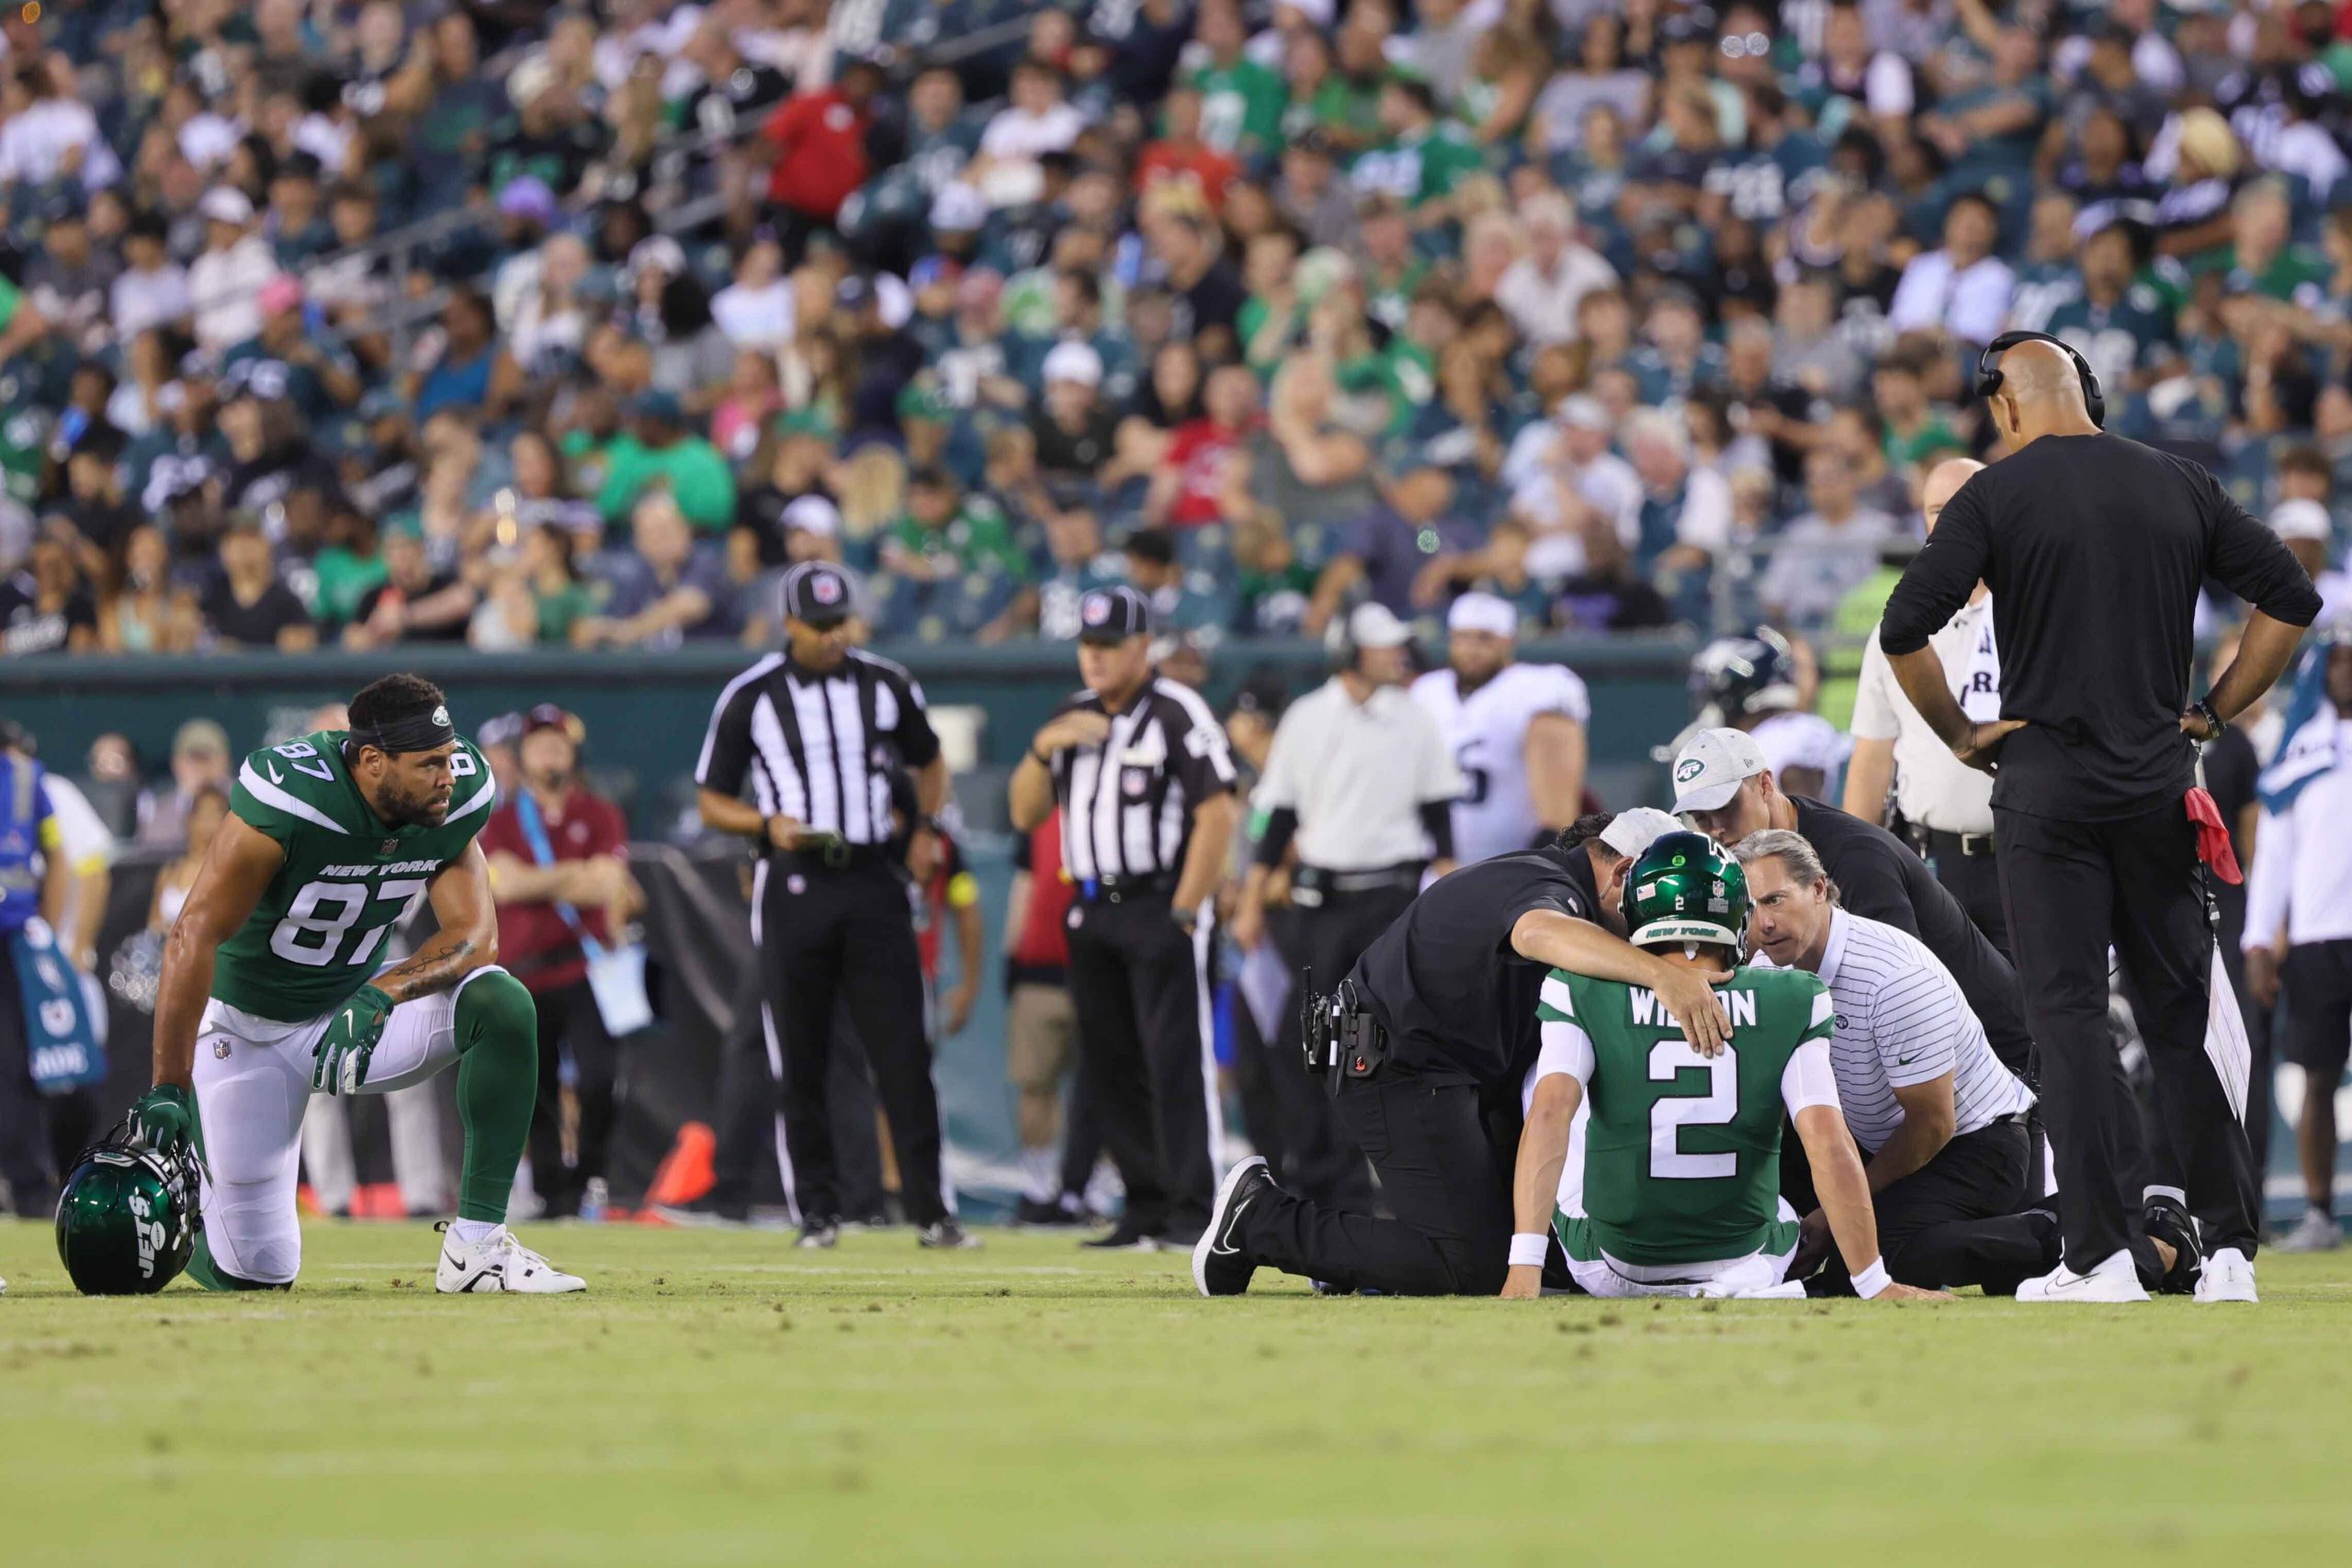 August 12, 2022, Philadelphia, PA, United States of America: New York Jets quarterback ZACH WILSON 2 is checked out by medical staff as New York Jets tight end C.J. UZOMAH 87 looks on during a preseason game between the Philadelphia Eagles and the New York Jets Friday, Aug 12, 2022, at Lincoln financial Field in Philadelphia, PA. Philadelphia United States of America - ZUMAs124 20220812_zap_s124_036 Copyright: xSaquanxStimpsonx